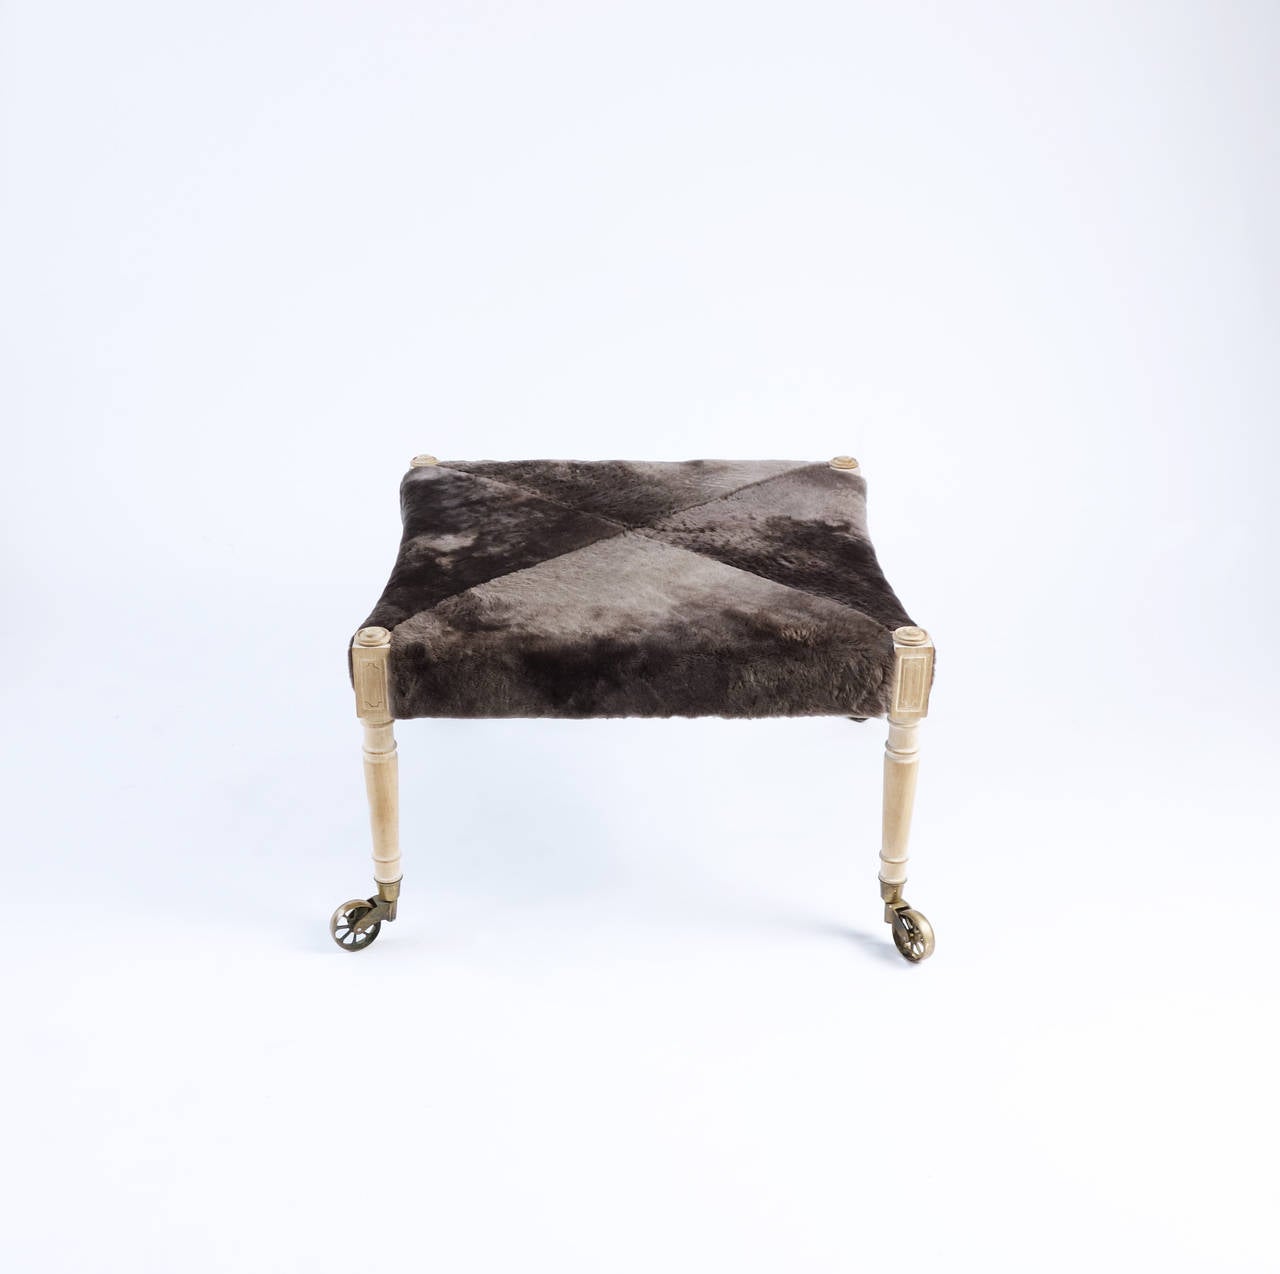 English Shearling-Covered Neoclassical Ottoman